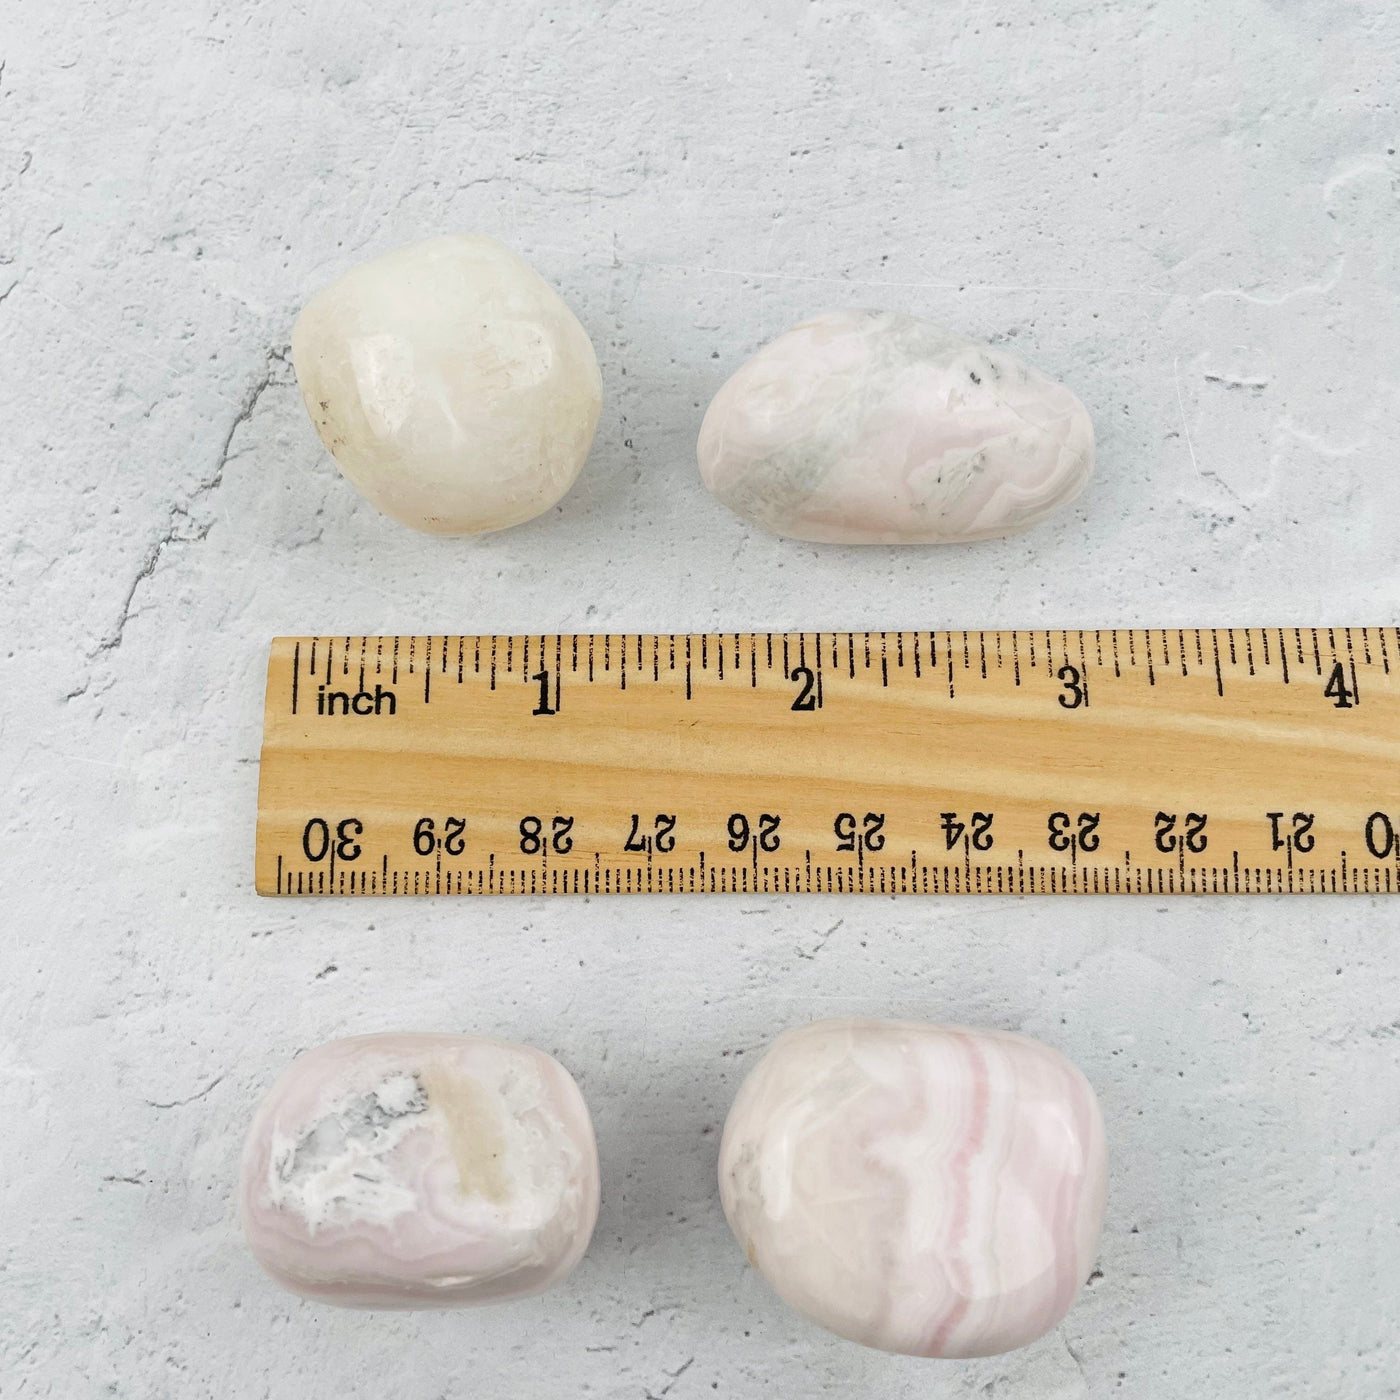 tumbled stones next to a ruler for size reference 